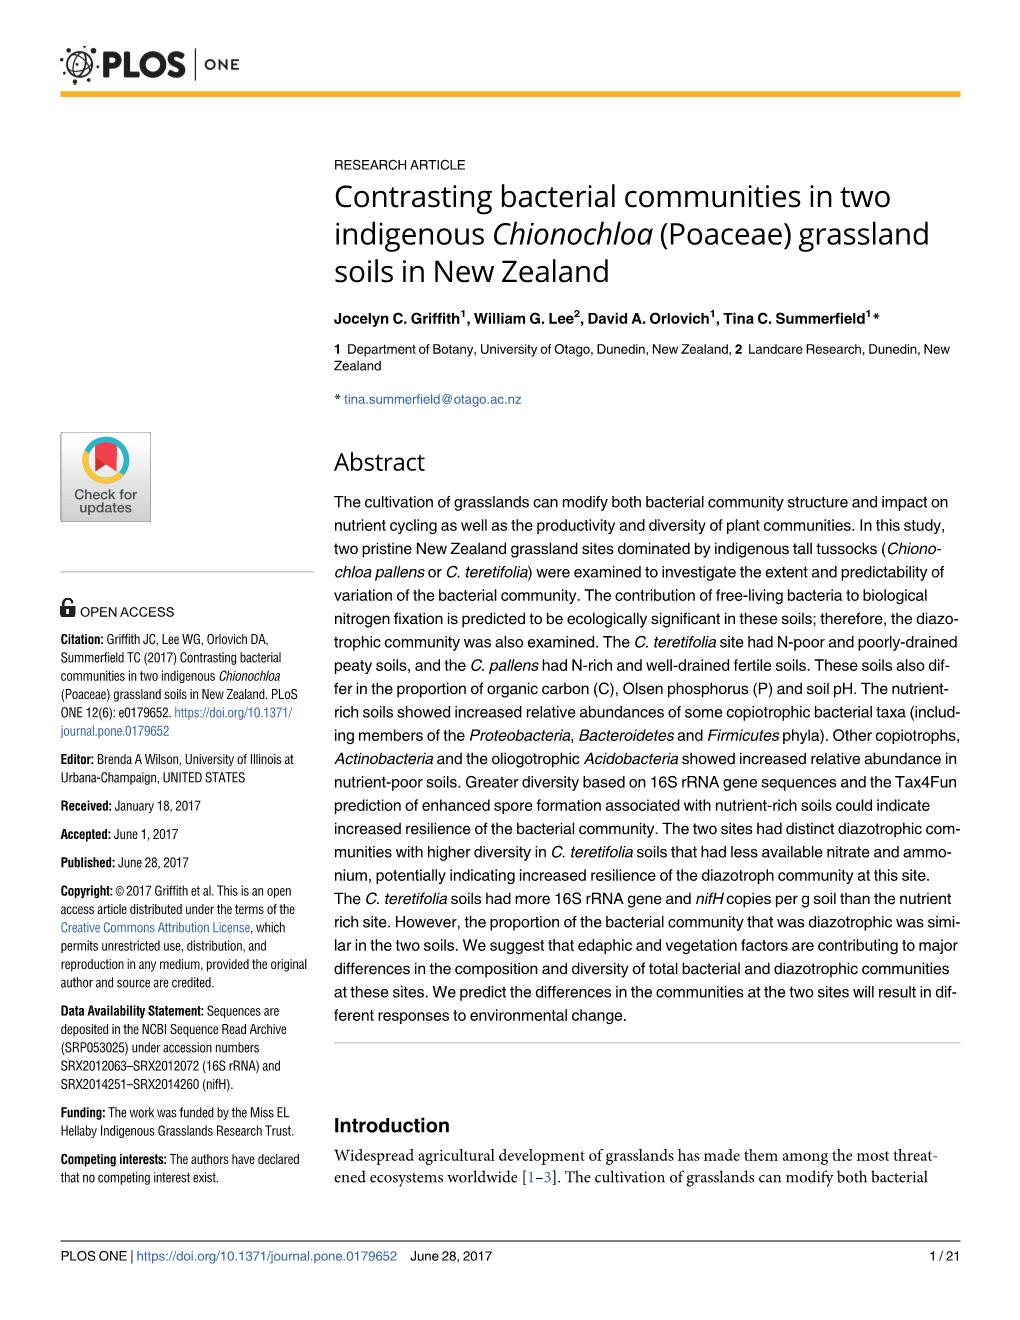 Contrasting Bacterial Communities in Two Indigenous Chionochloa (Poaceae) Grassland Soils in New Zealand